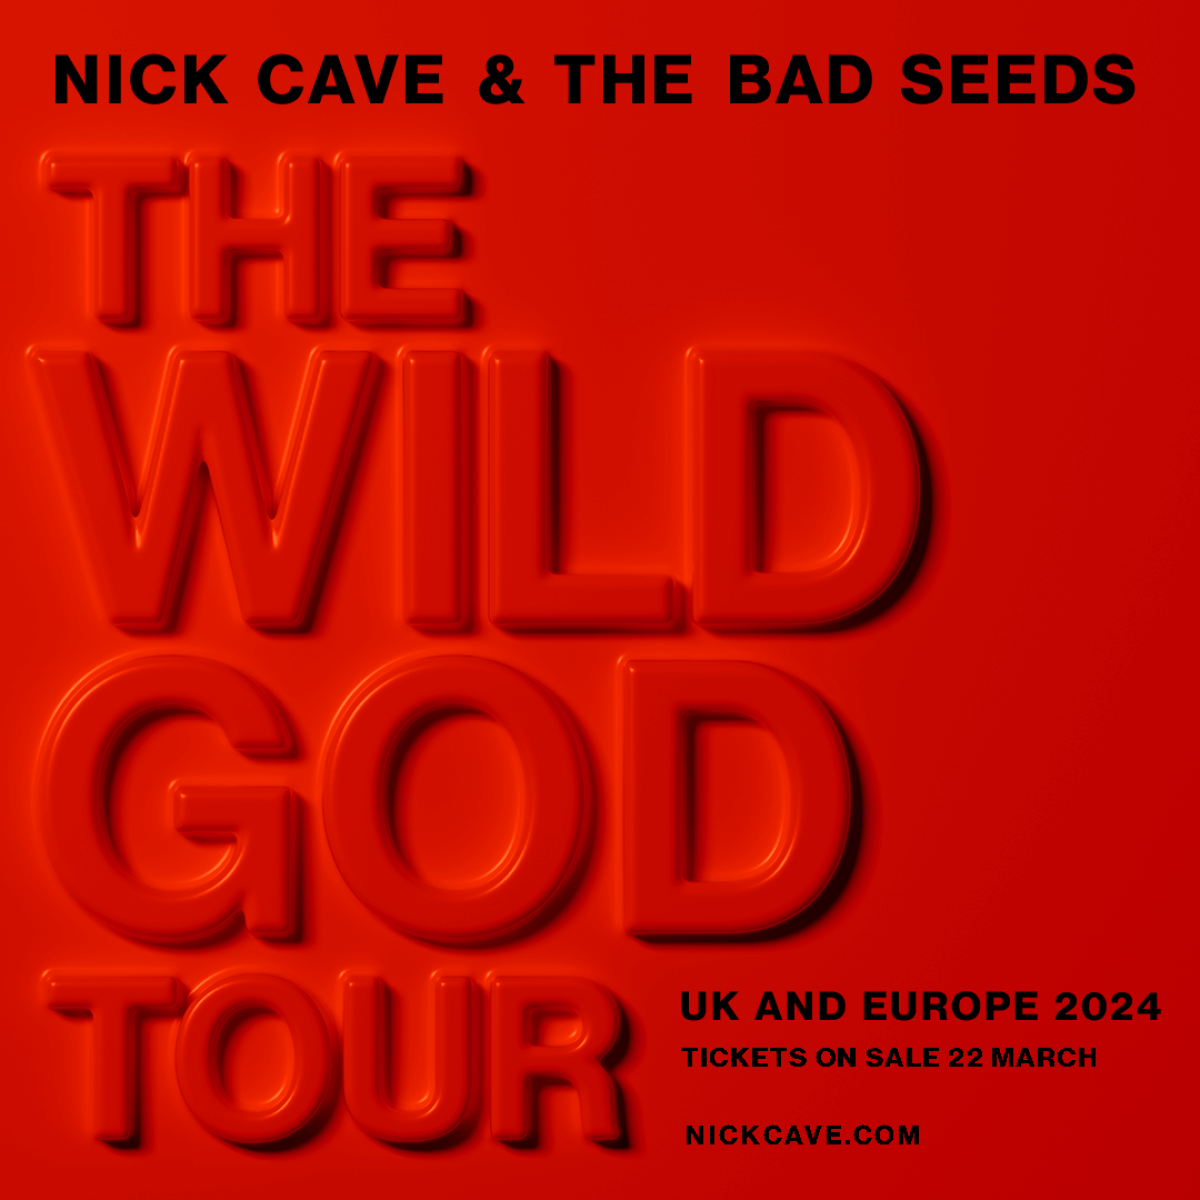 Nick Cave and the Bad Seeds - The Wild God Tour in der Barclays Arena Tickets